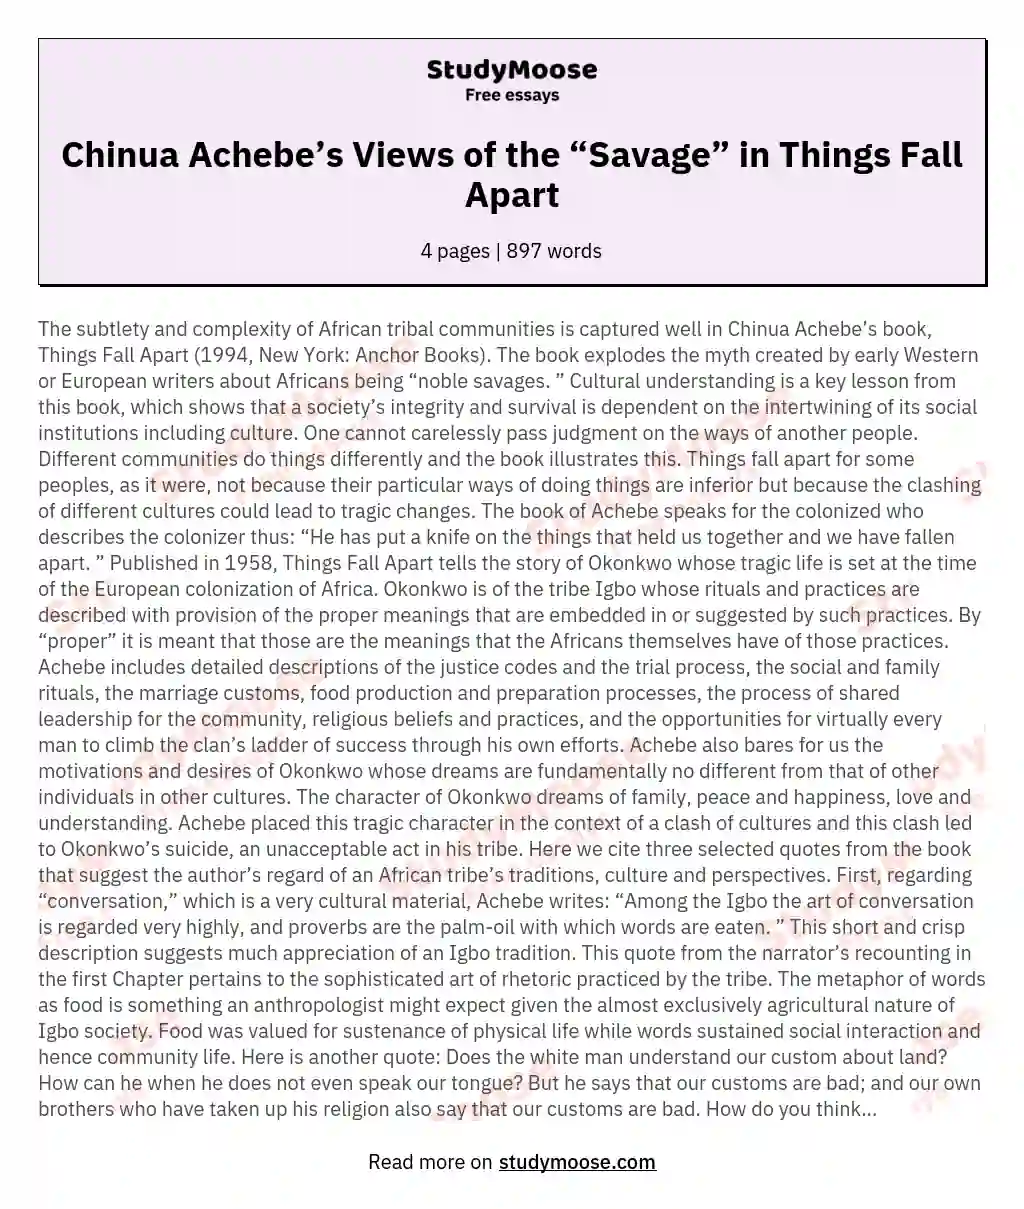 Chinua Achebe’s Views of the “Savage” in Things Fall Apart essay